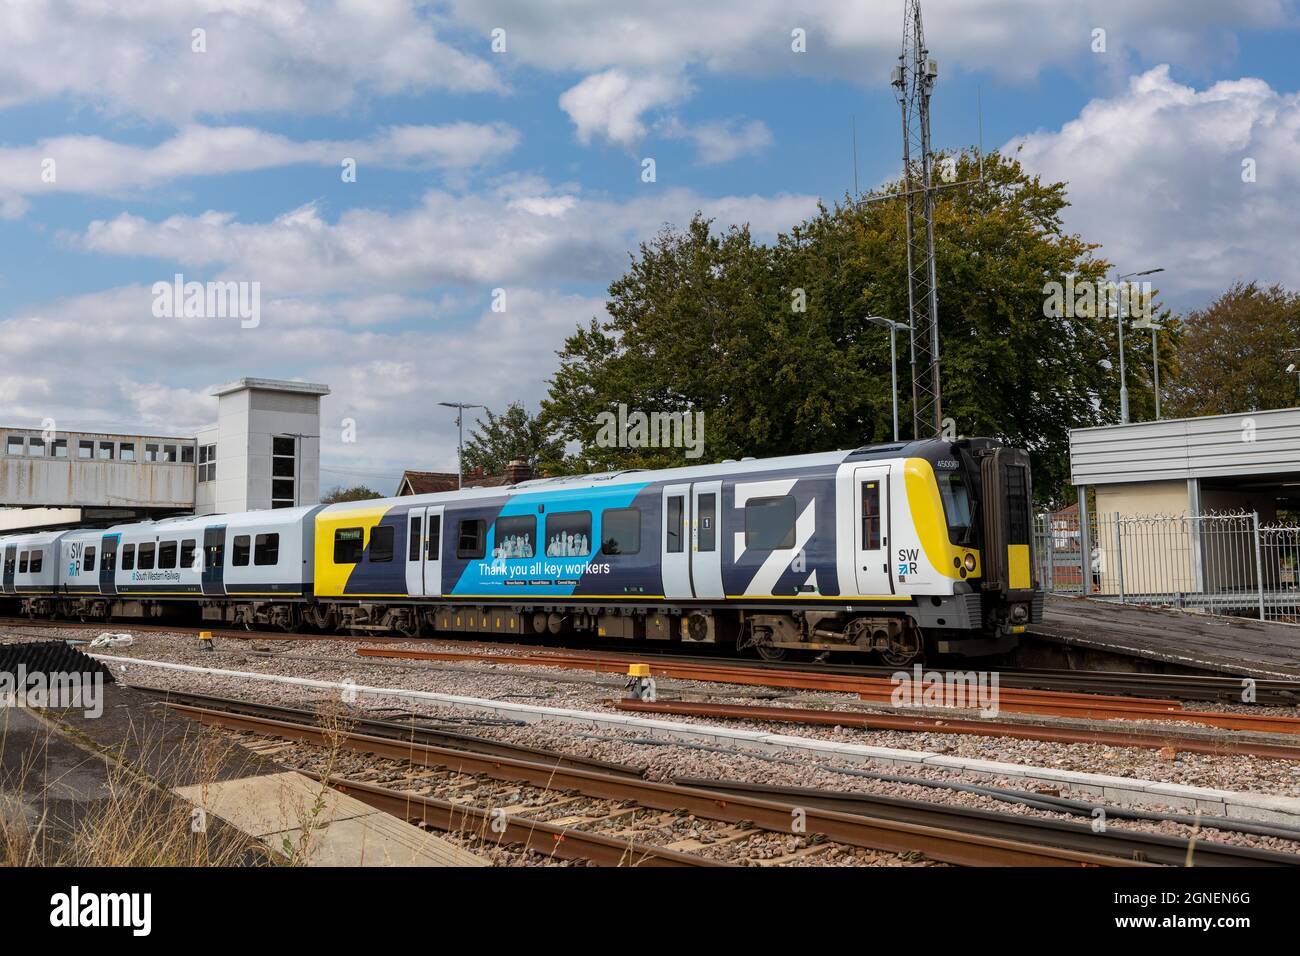 South West Railway train passing through Havant Station. Customised livery to show thanks to the NHS during the covid pandemic. Stock Photo